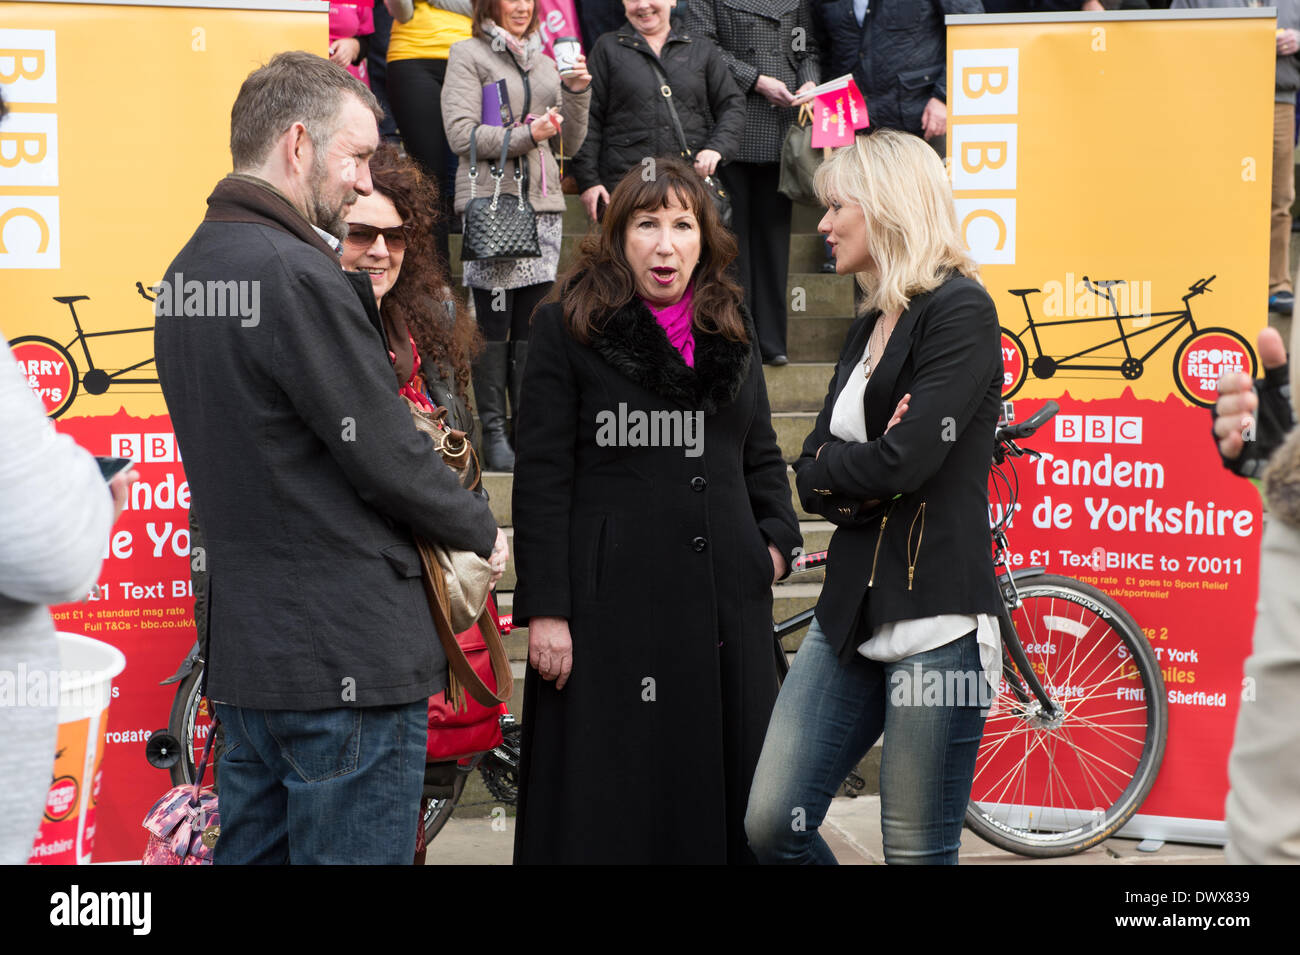 Before the start of Look North's Harry & Amy's Tandem Tour de Yorkshire in aid of Sport Relief. Kay Mellor & Linda Barker chatting, while crowd of supporters stands behind - Leeds Town Hall, West Yorkshire, England, UK. Stock Photo